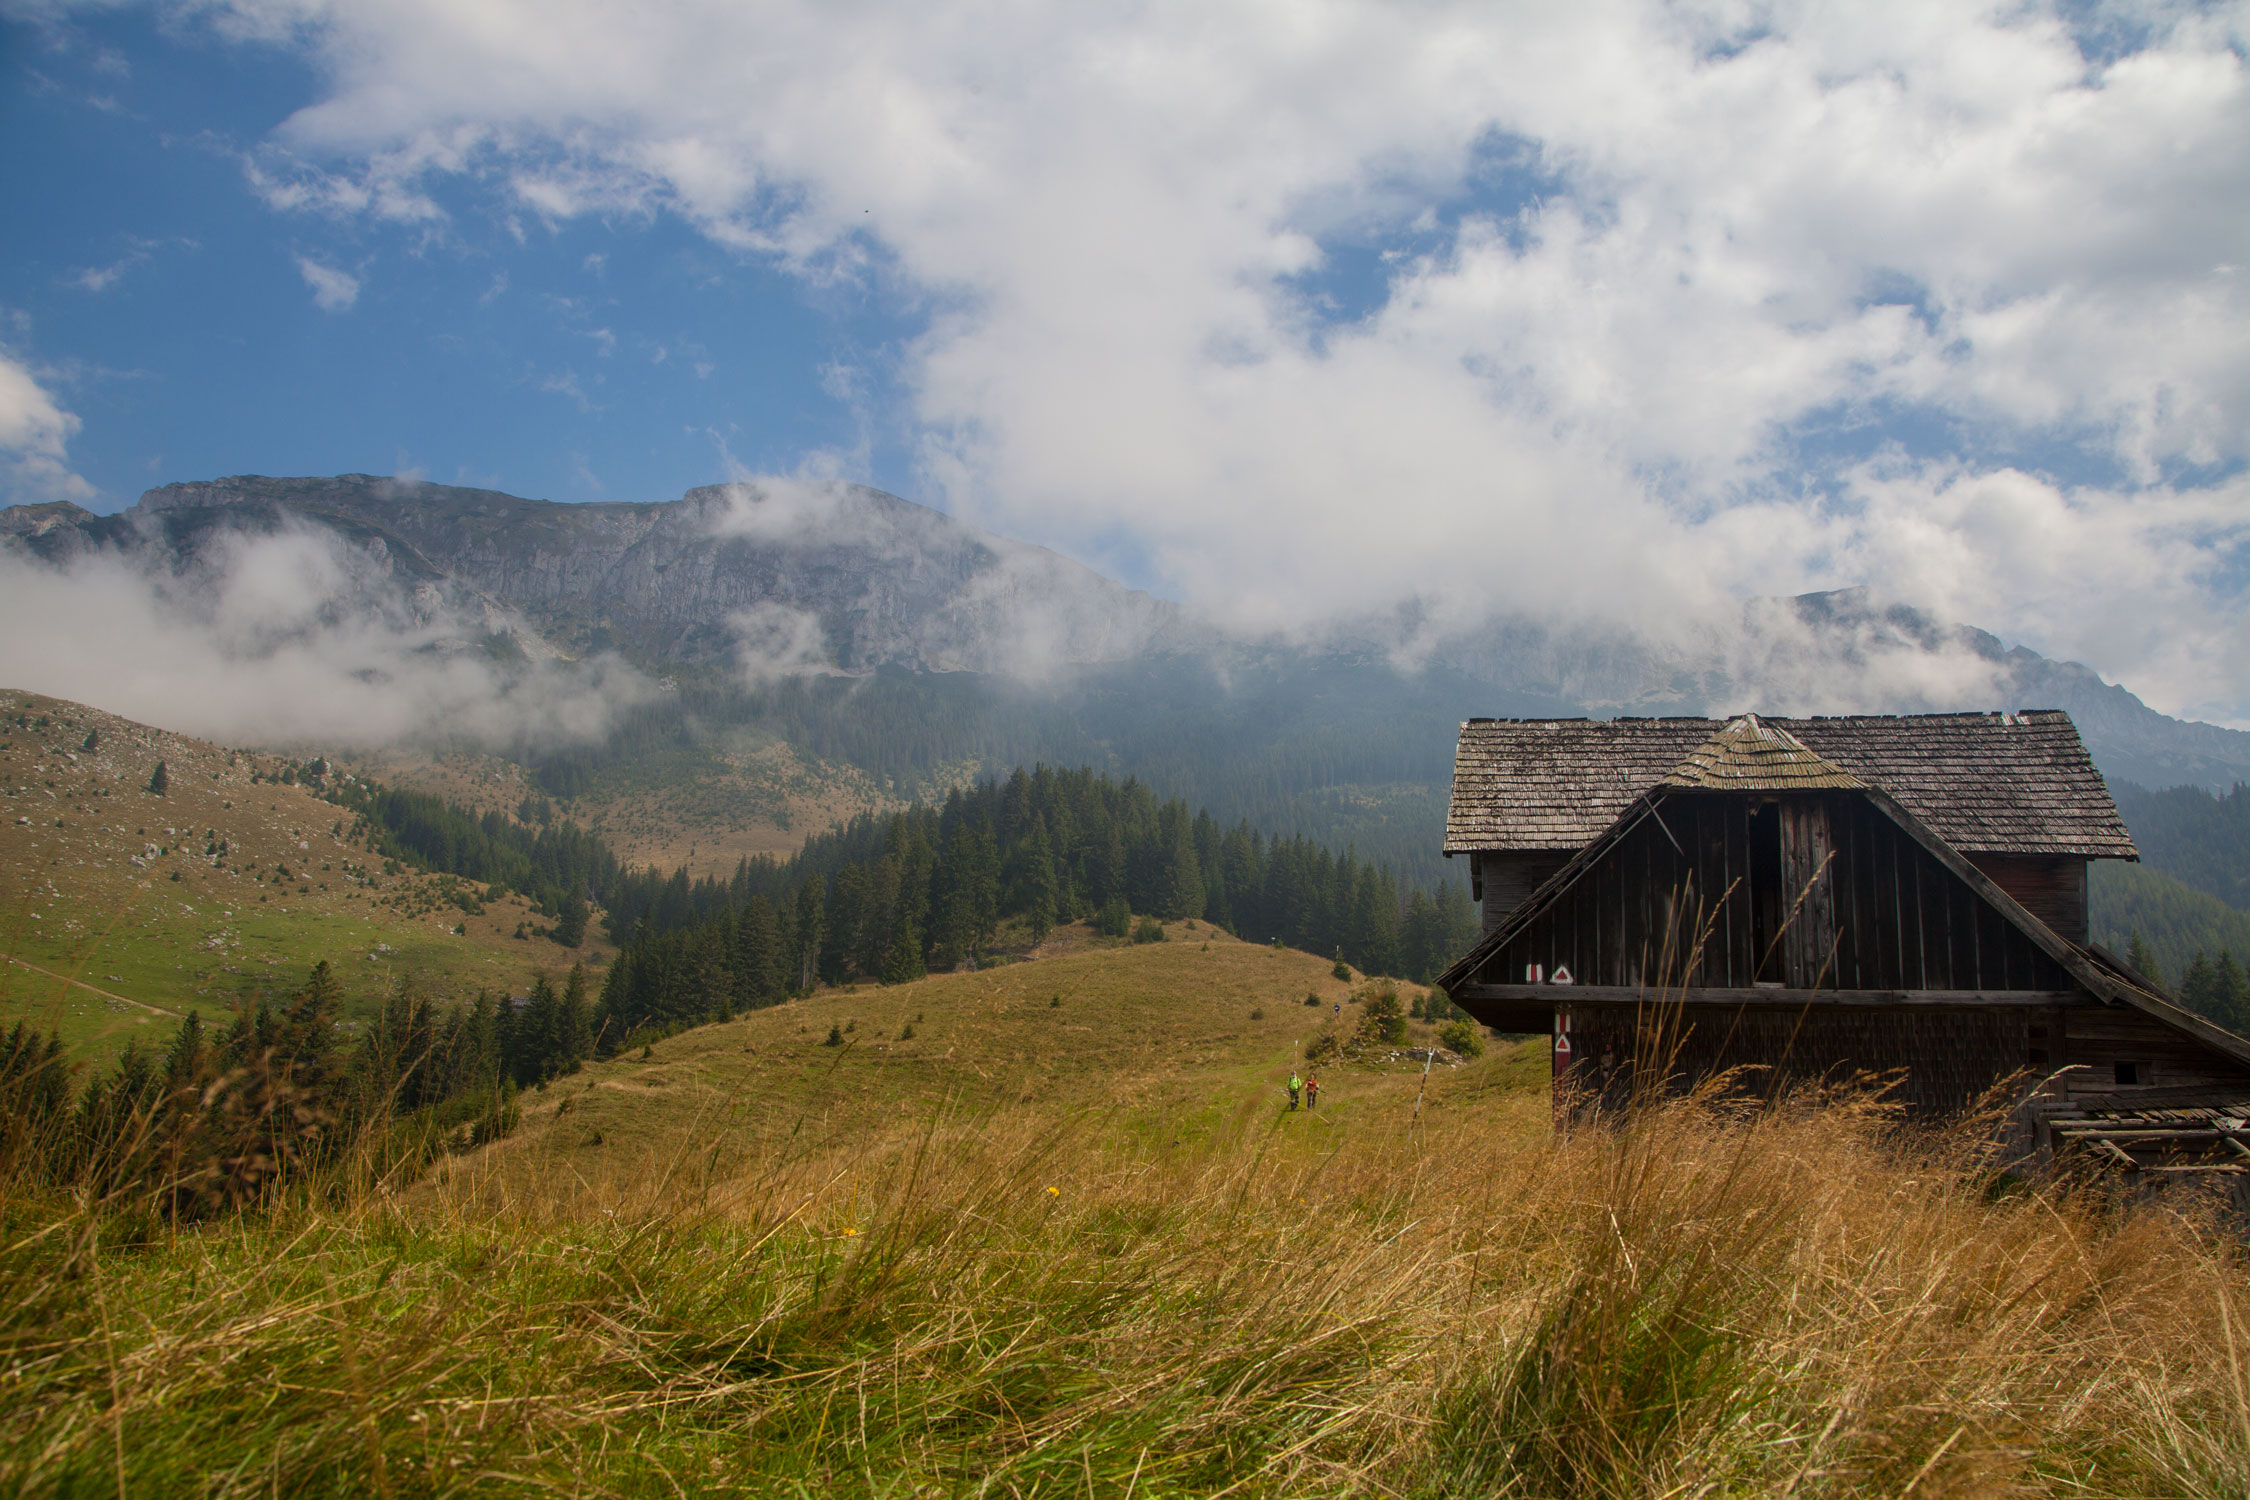 Romanian mountains - photo by Cinty Ionescu and featured in this album on Flickr and shared under a CC BY 2.0 Creative Commons License